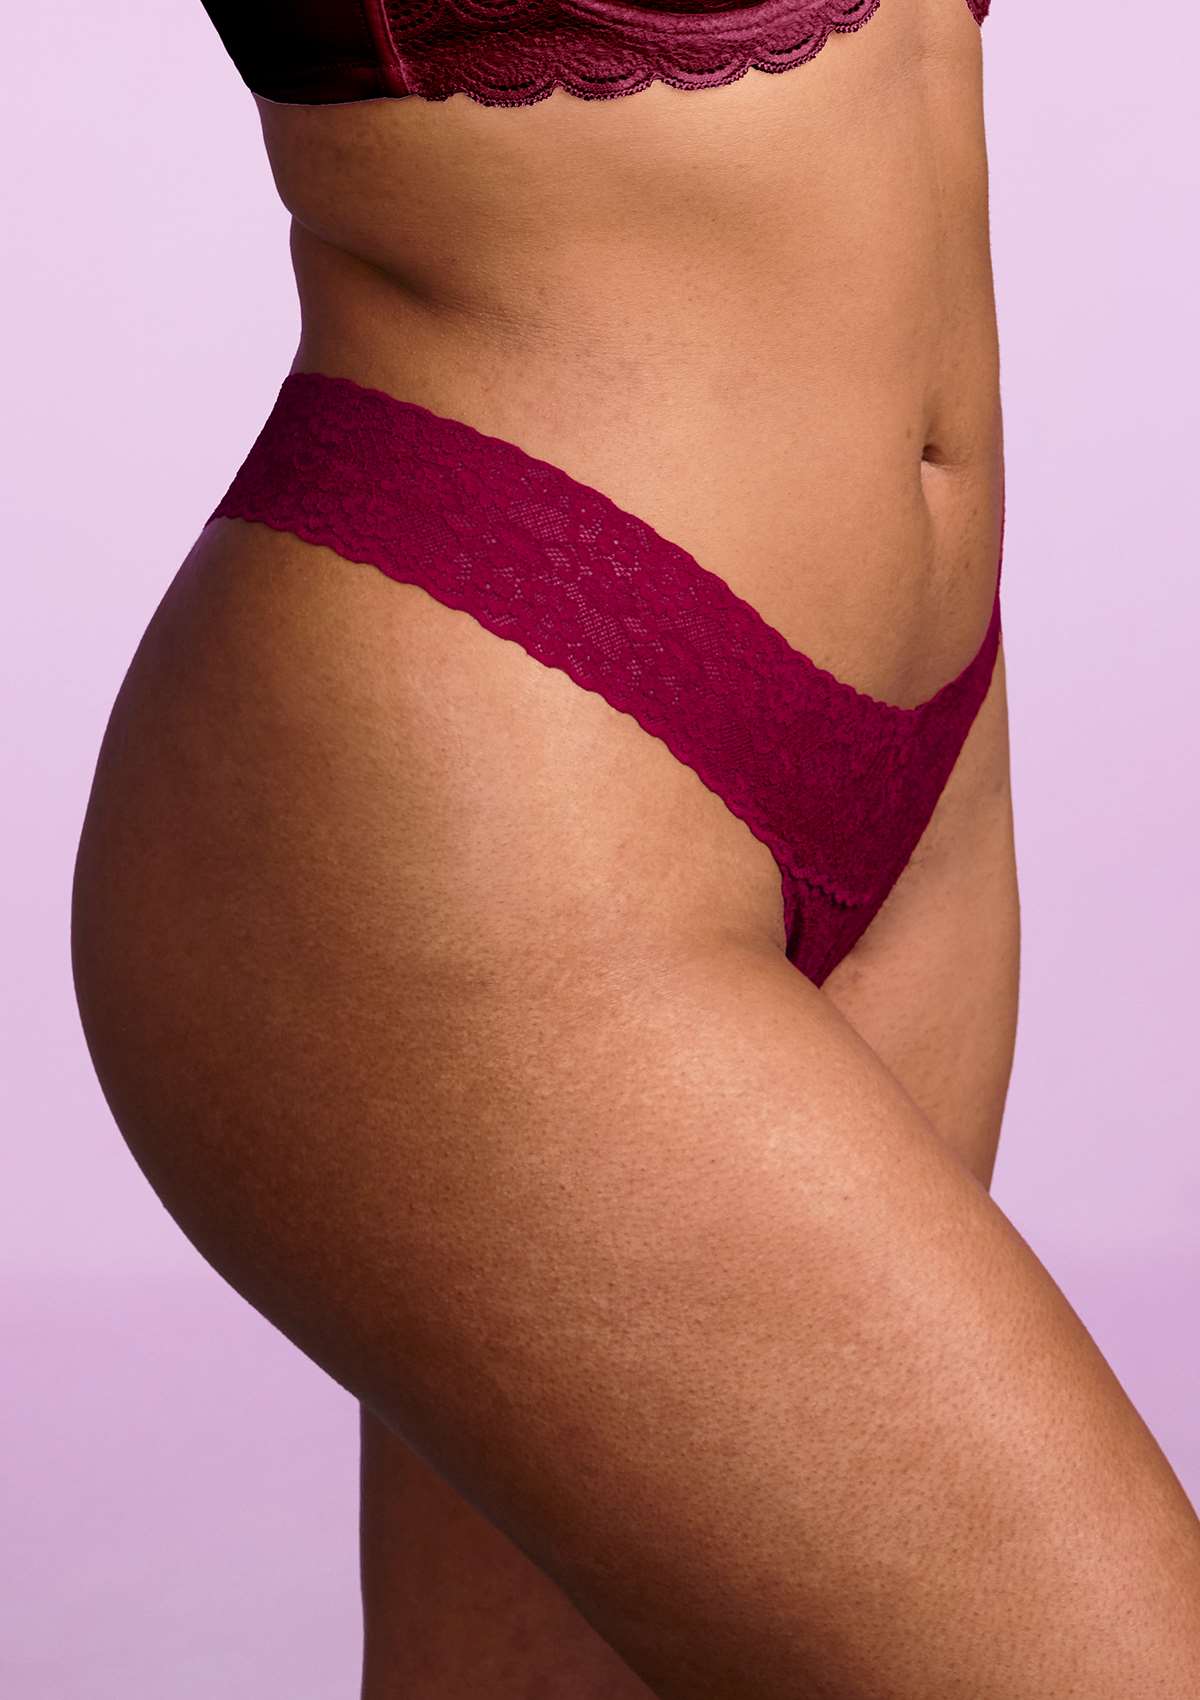 HSIA Soft Sexy Lace Cheeky Thong Underwear 3 Pack - XL / Black+Burgundy+White